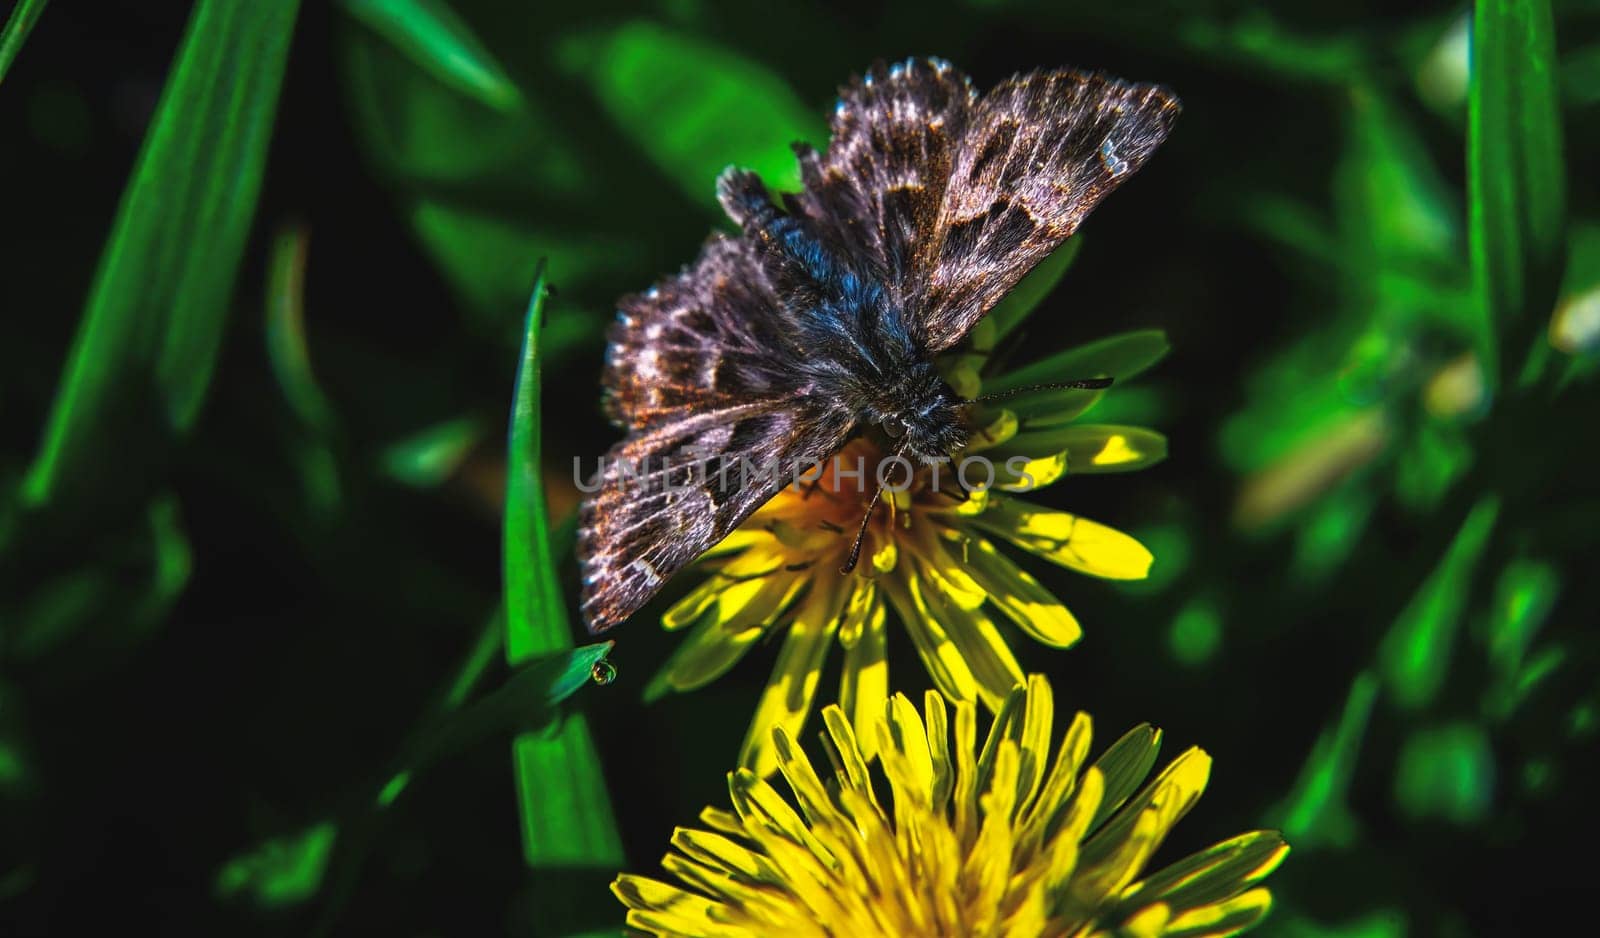 Close up image of a small brown butterfly, with spread wings sitting on yellow dandelion flower growing on a ground